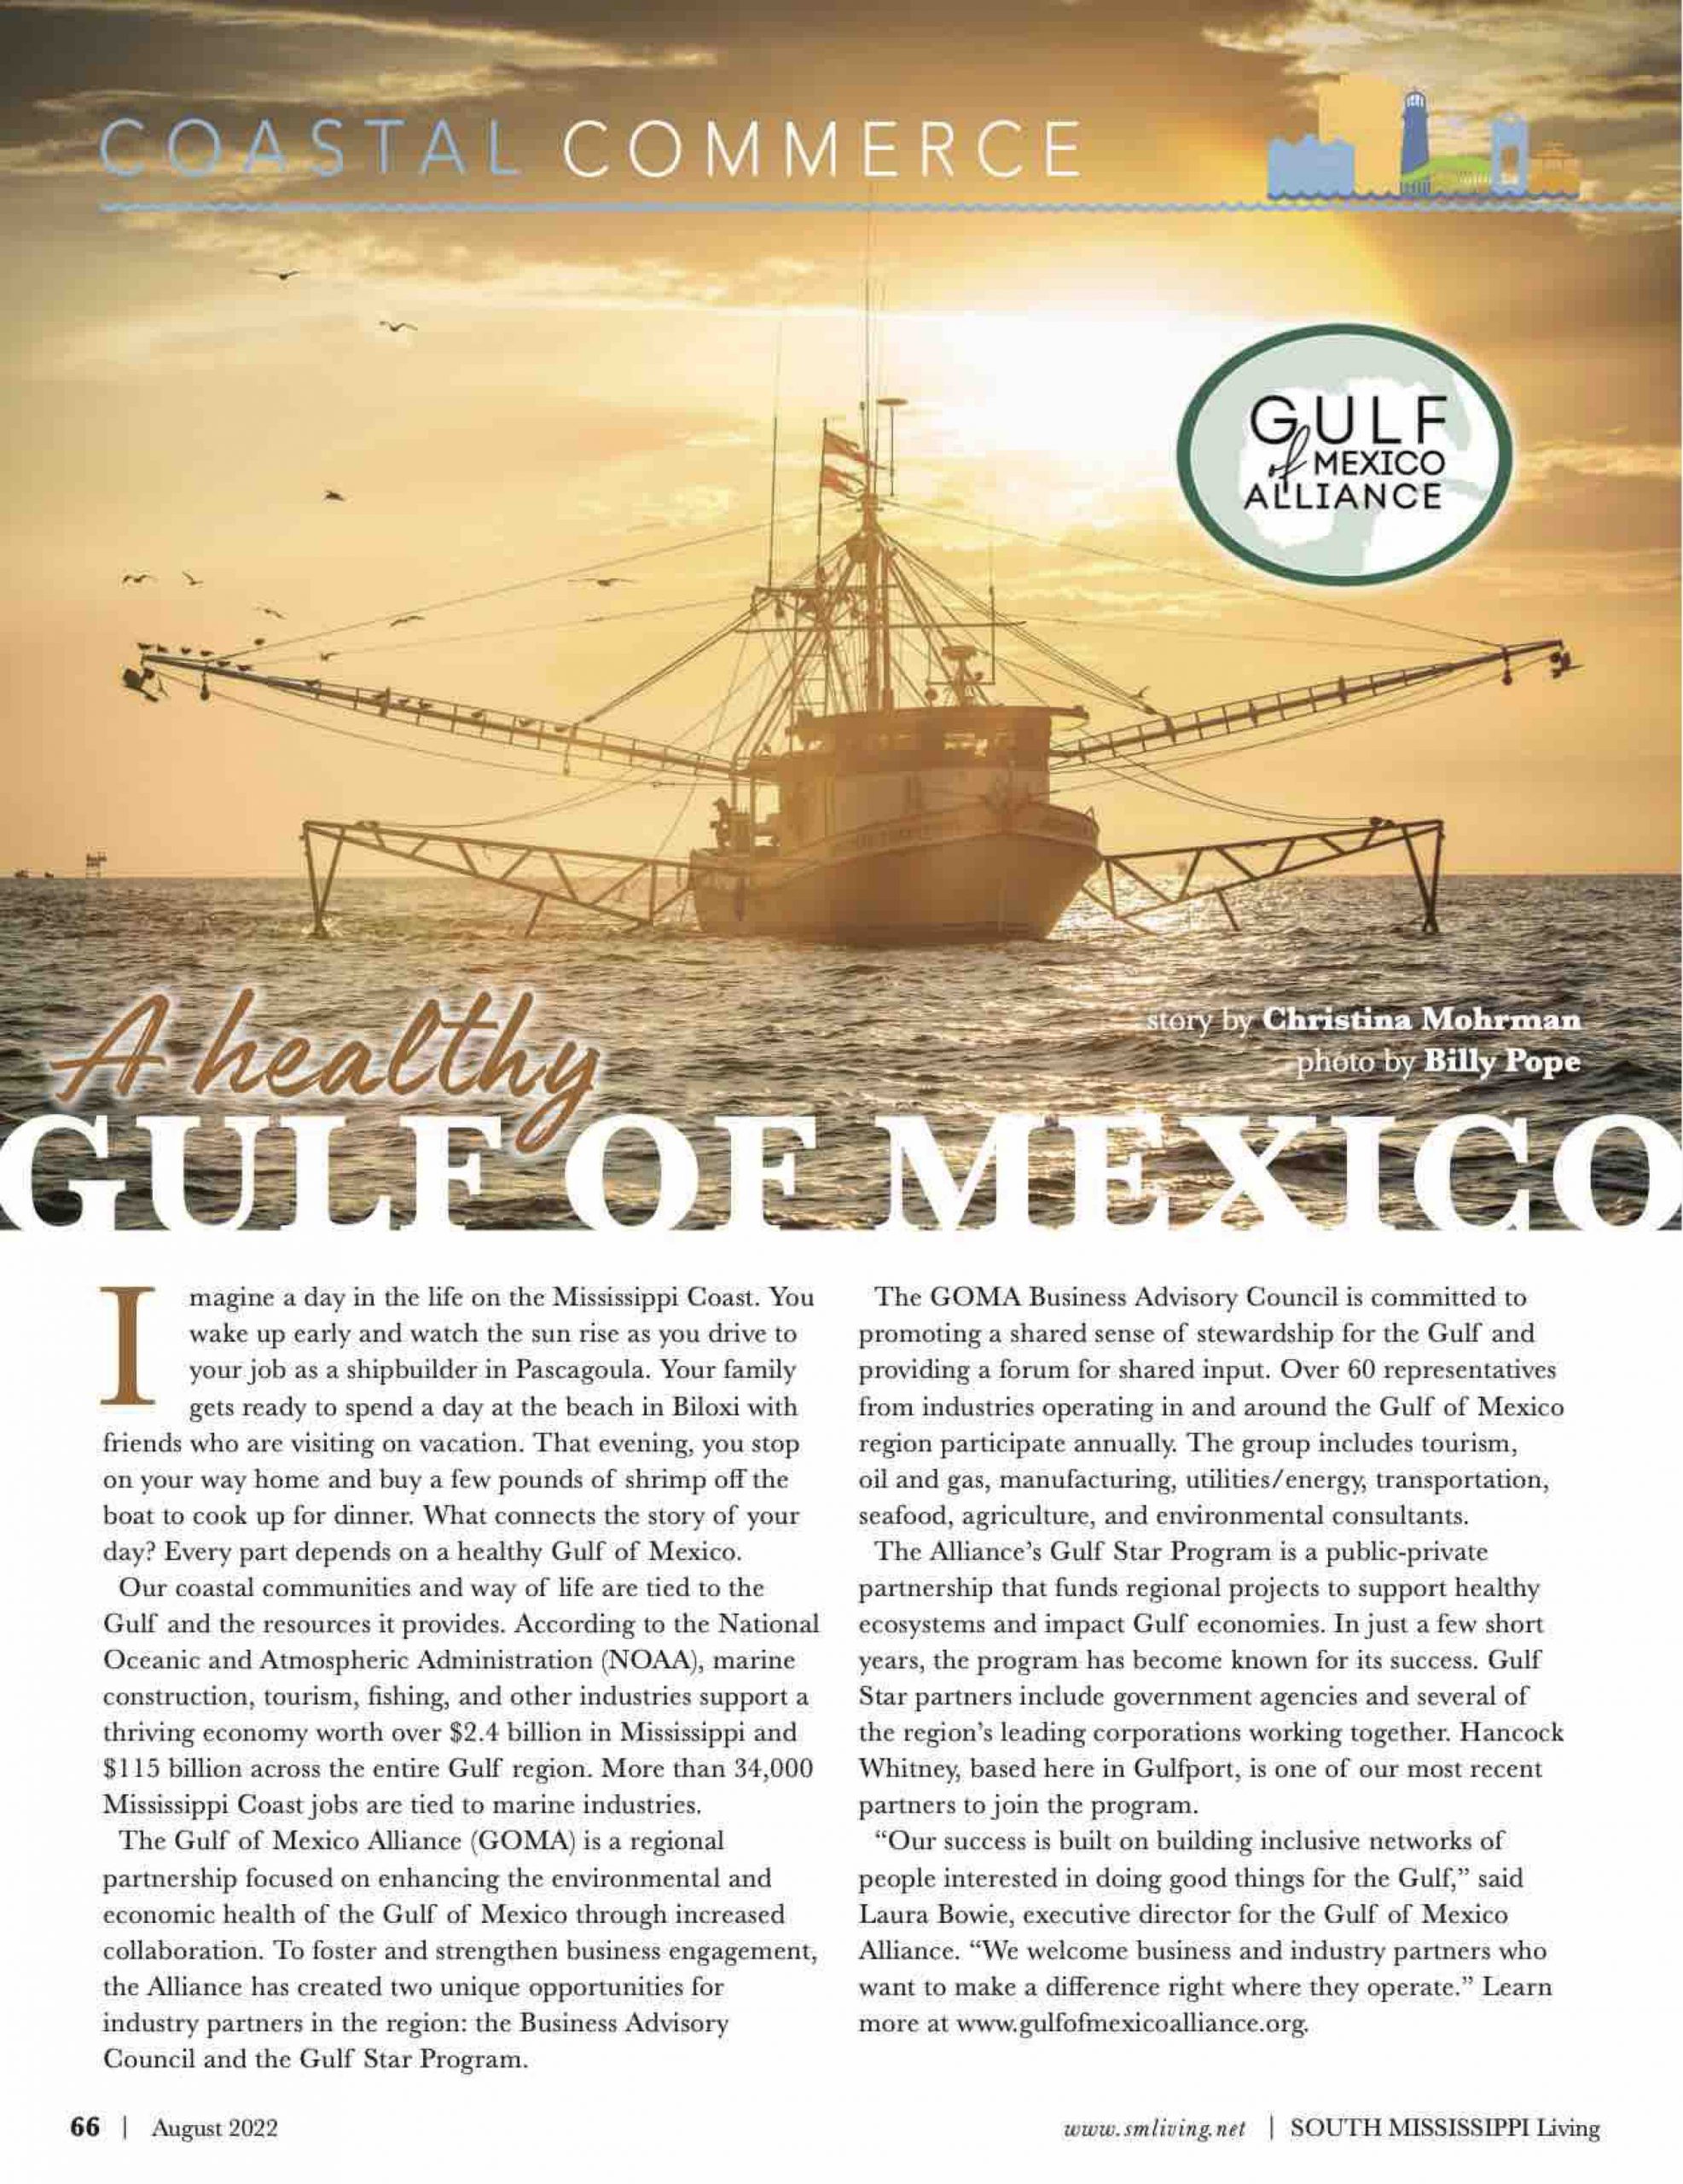 GOMA in South MS Living: A Healthy Gulf of Mexico - Gulf of Mexico Alliance